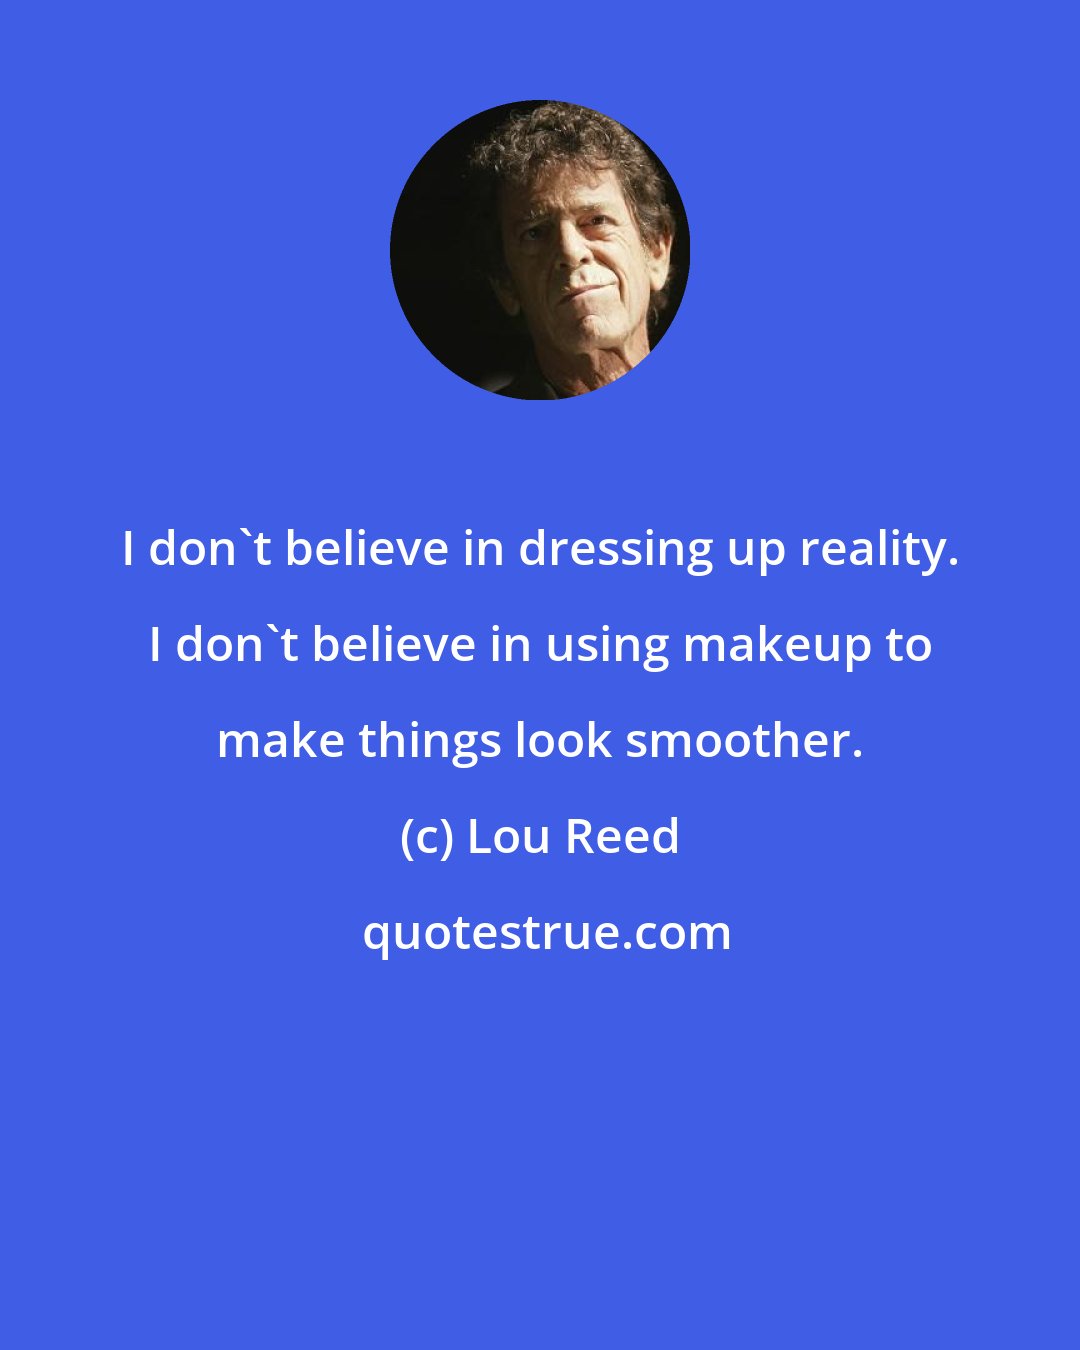 Lou Reed: I don't believe in dressing up reality. I don't believe in using makeup to make things look smoother.